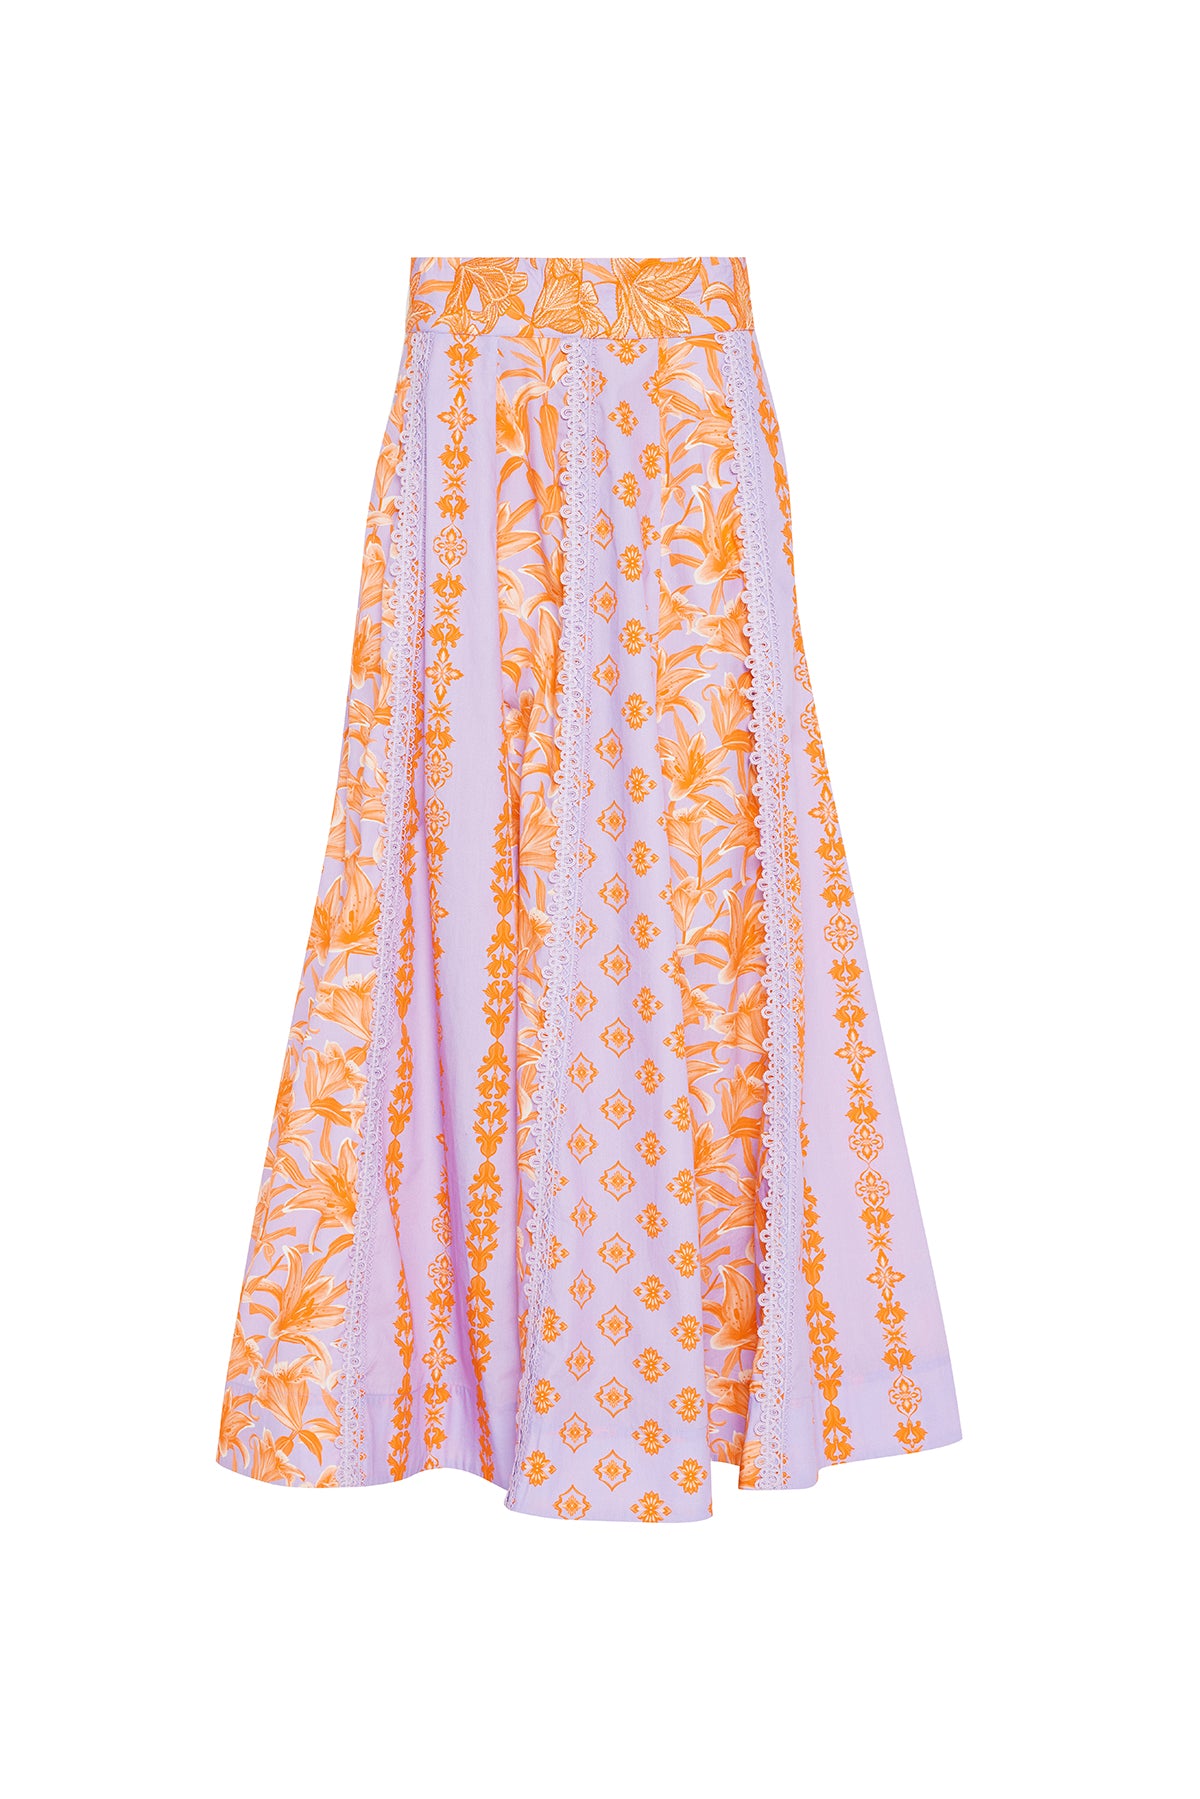 Hand Embroidered Paneled Maxi Skirt